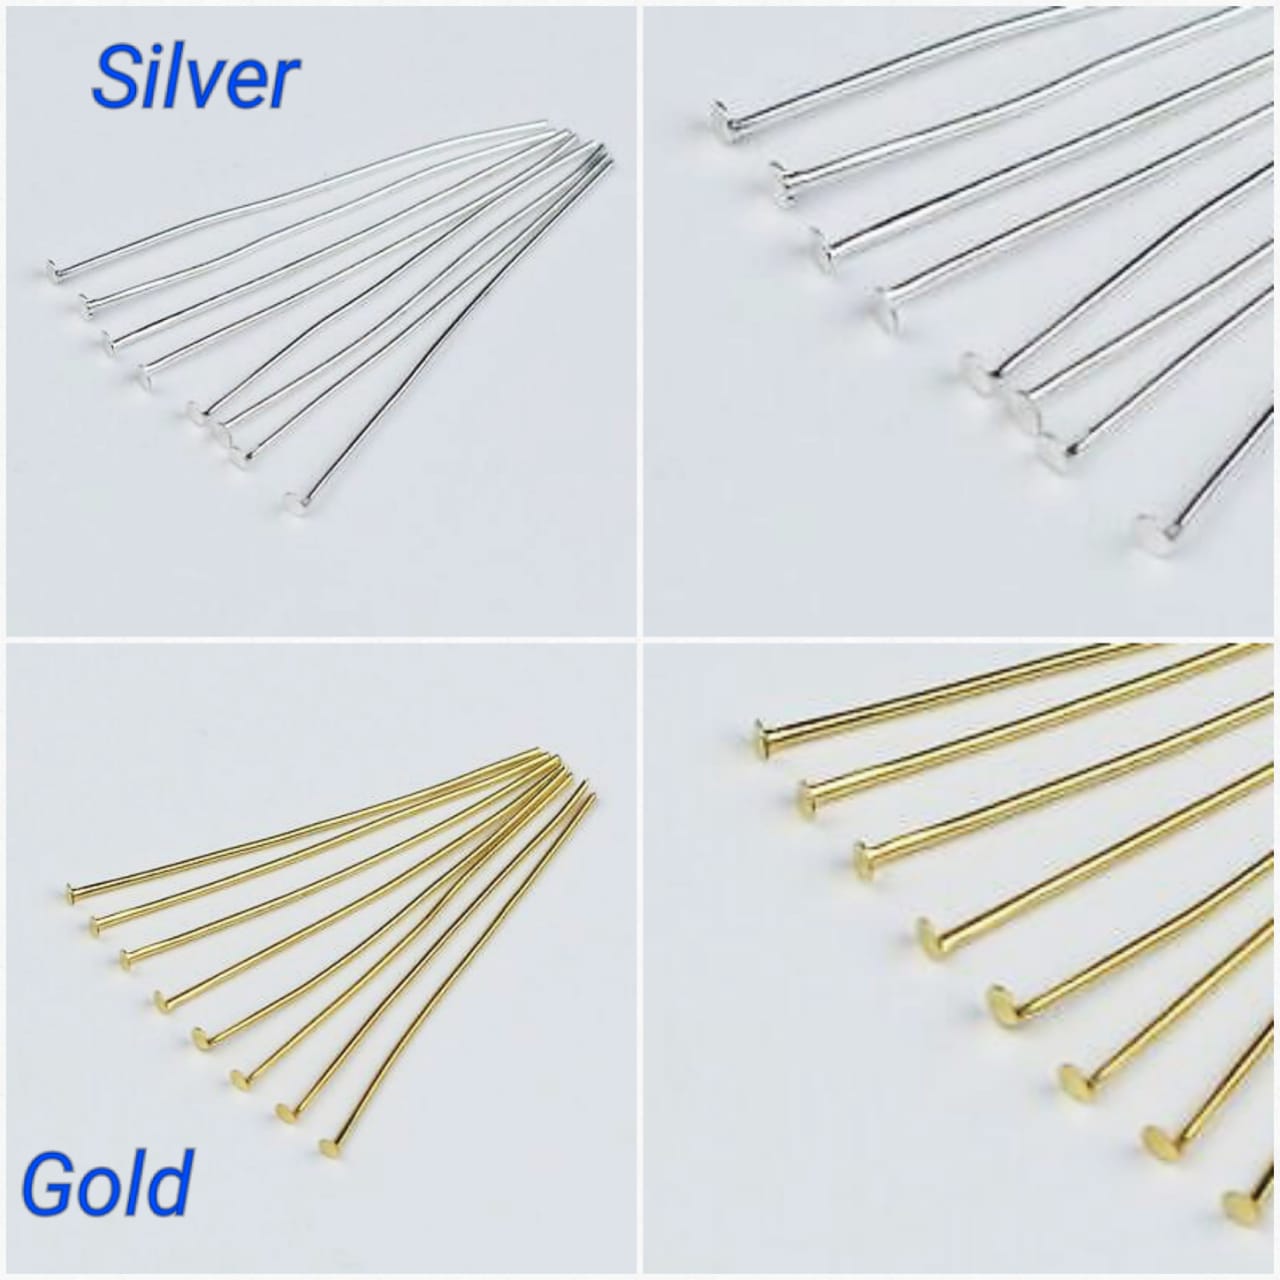 50 Pcs/bag 25 Mm Flat Head Pins Golden Head Pins For Making Jewelry Findings Diy Accessories